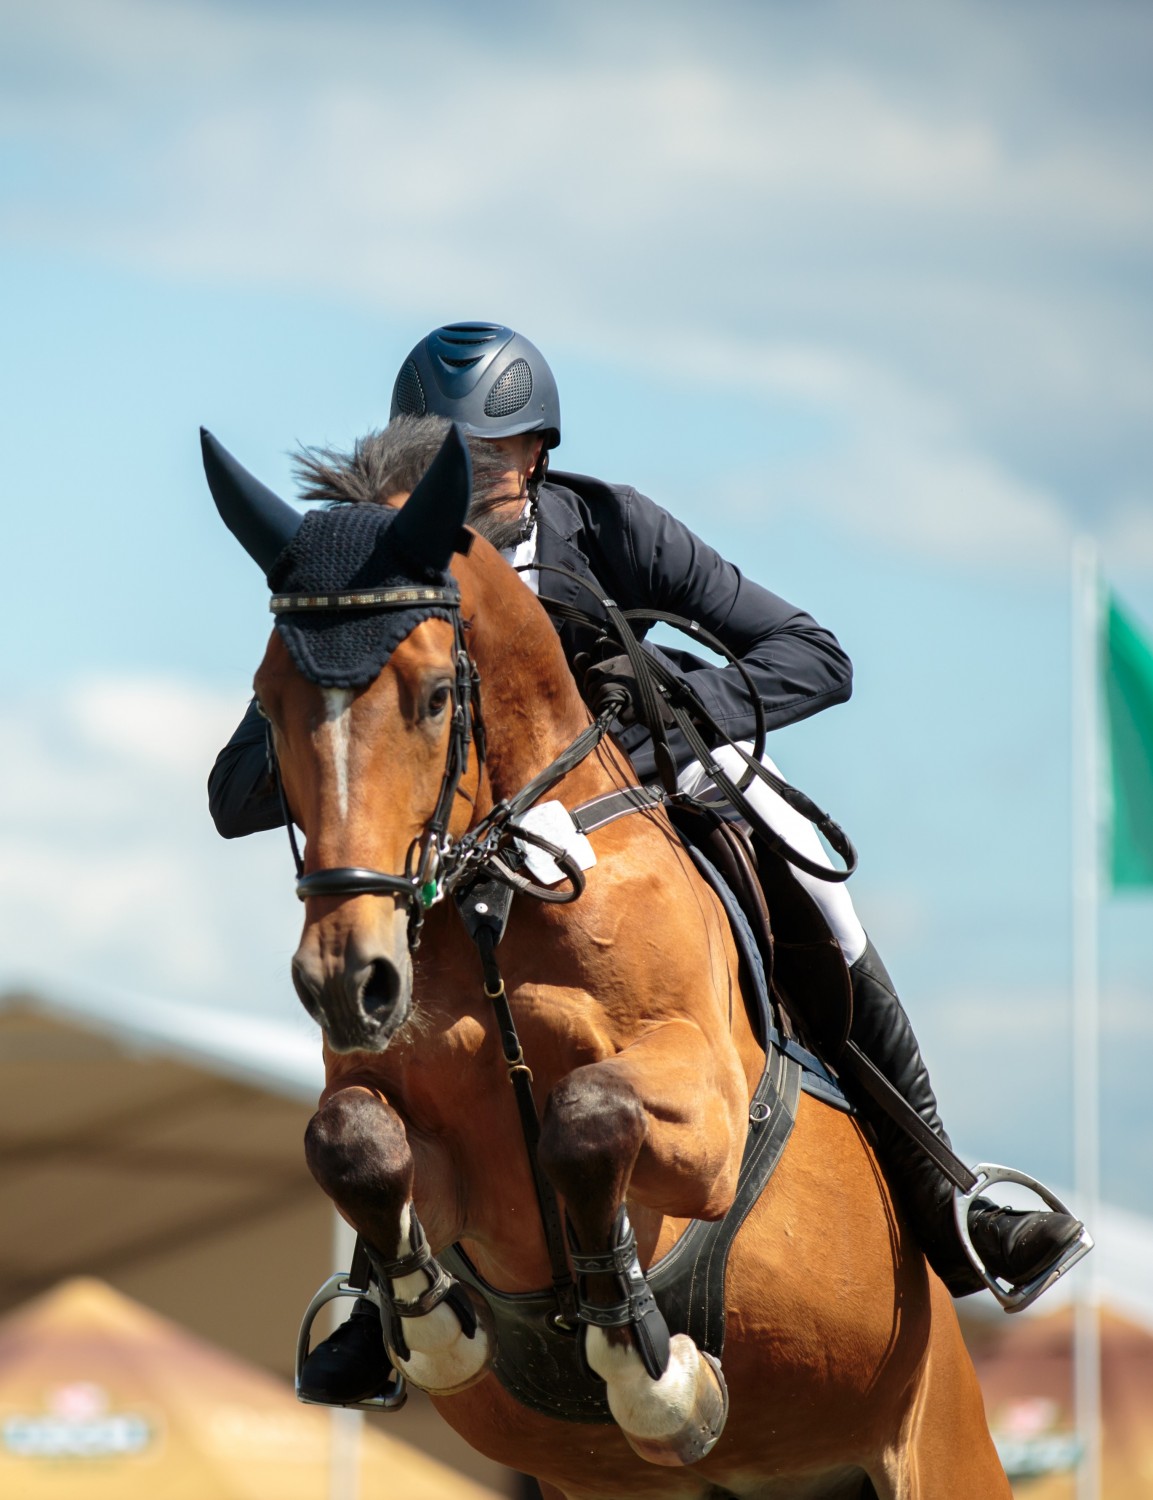 Man on Horse Jumping - Benefits of Chiropractic Care